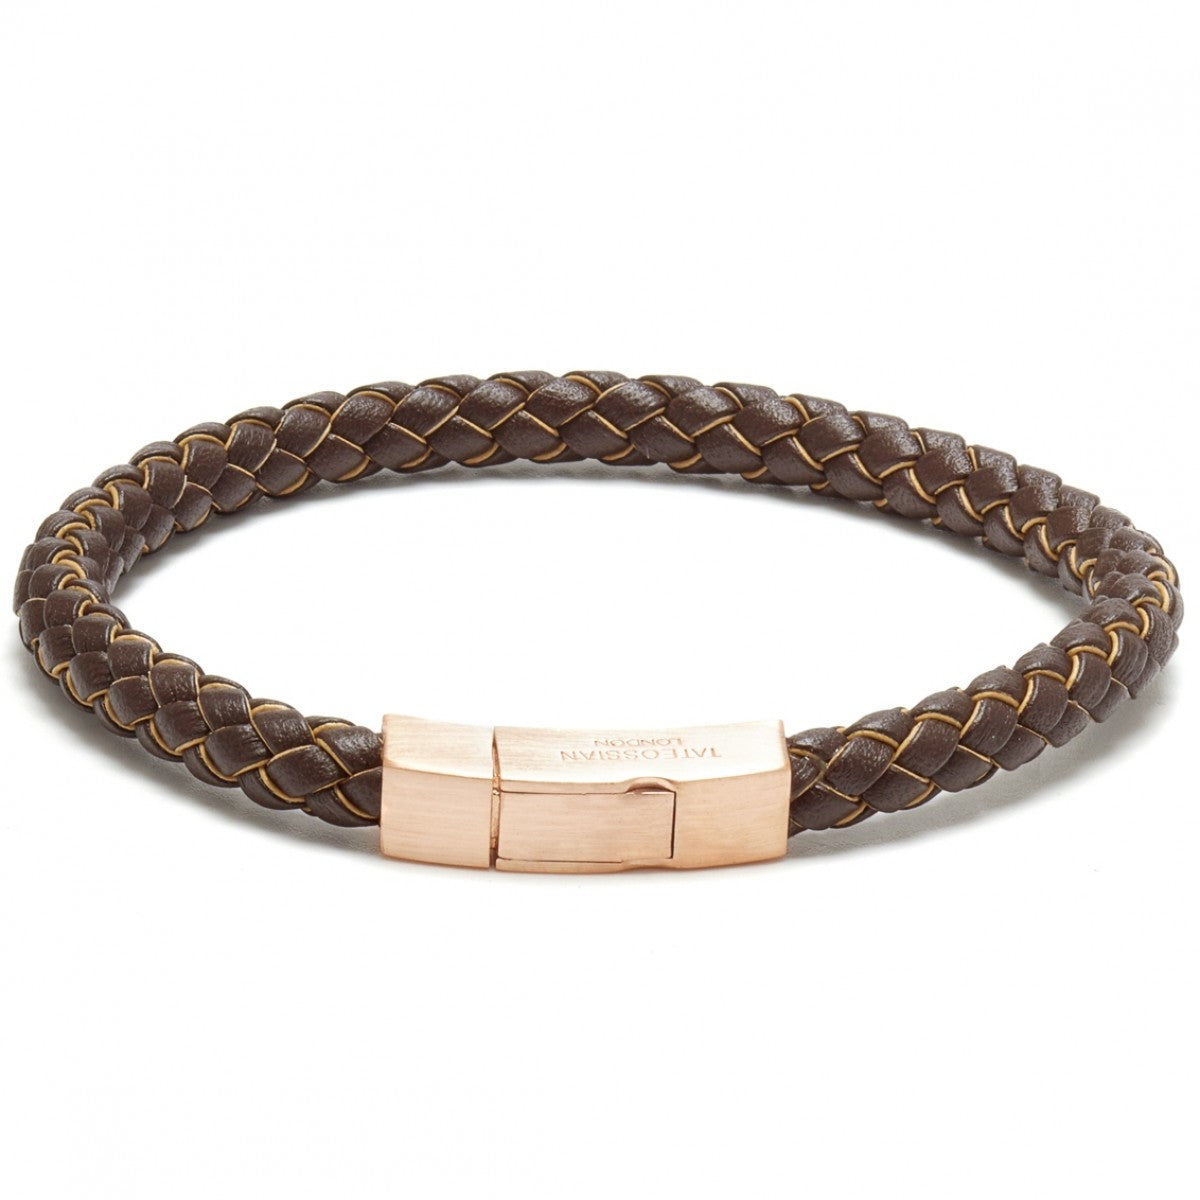 Tateossian Click Tocco Leather with Edge in Metallic Bracelet, Brown